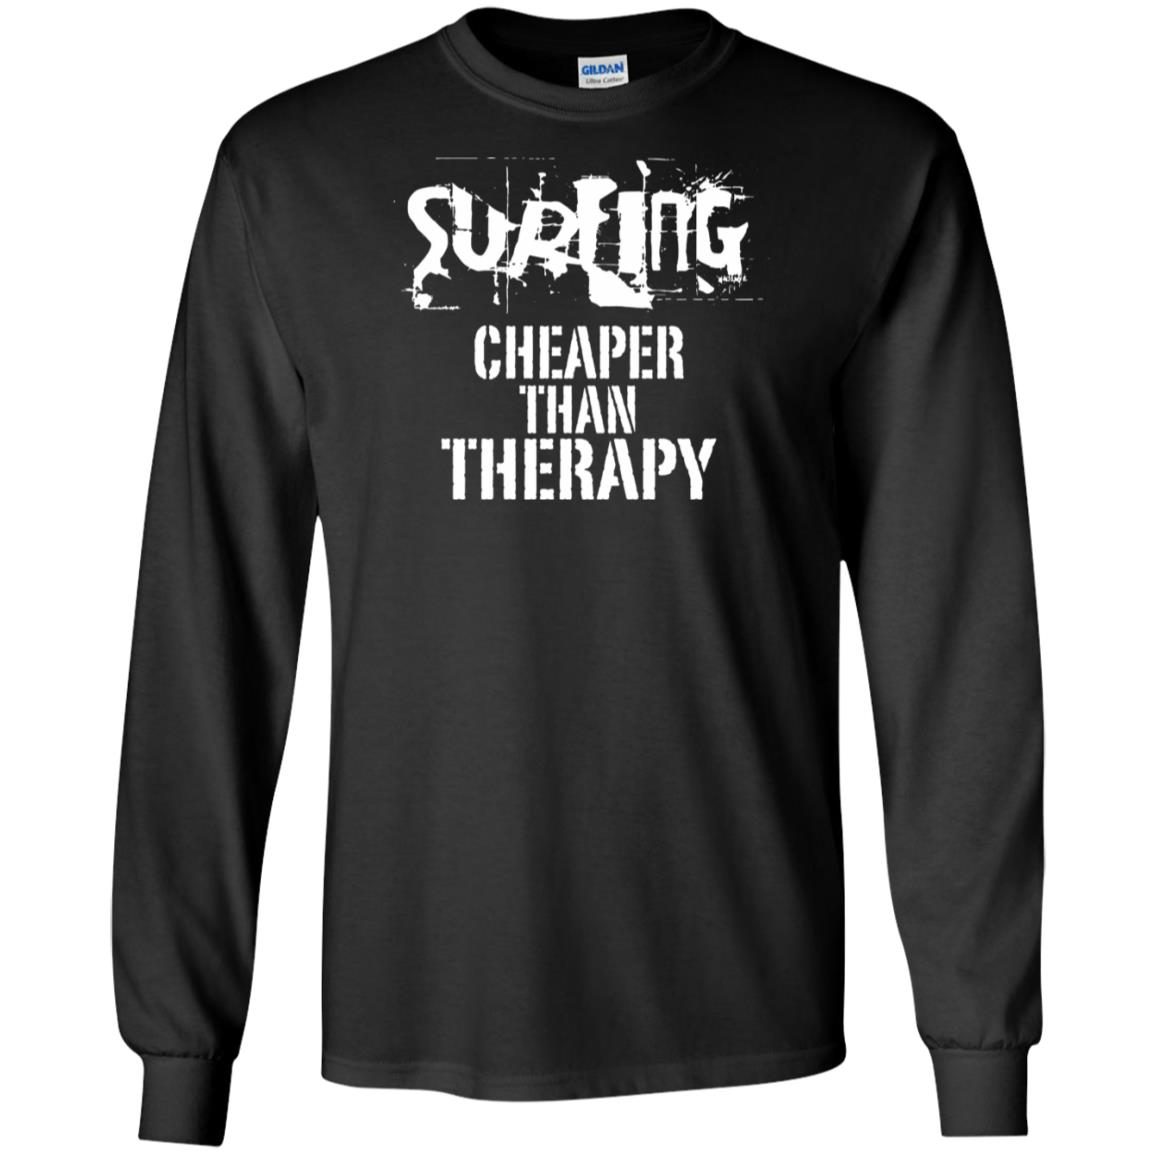 Surfing, Cheaper Than Therapy Shirt 11